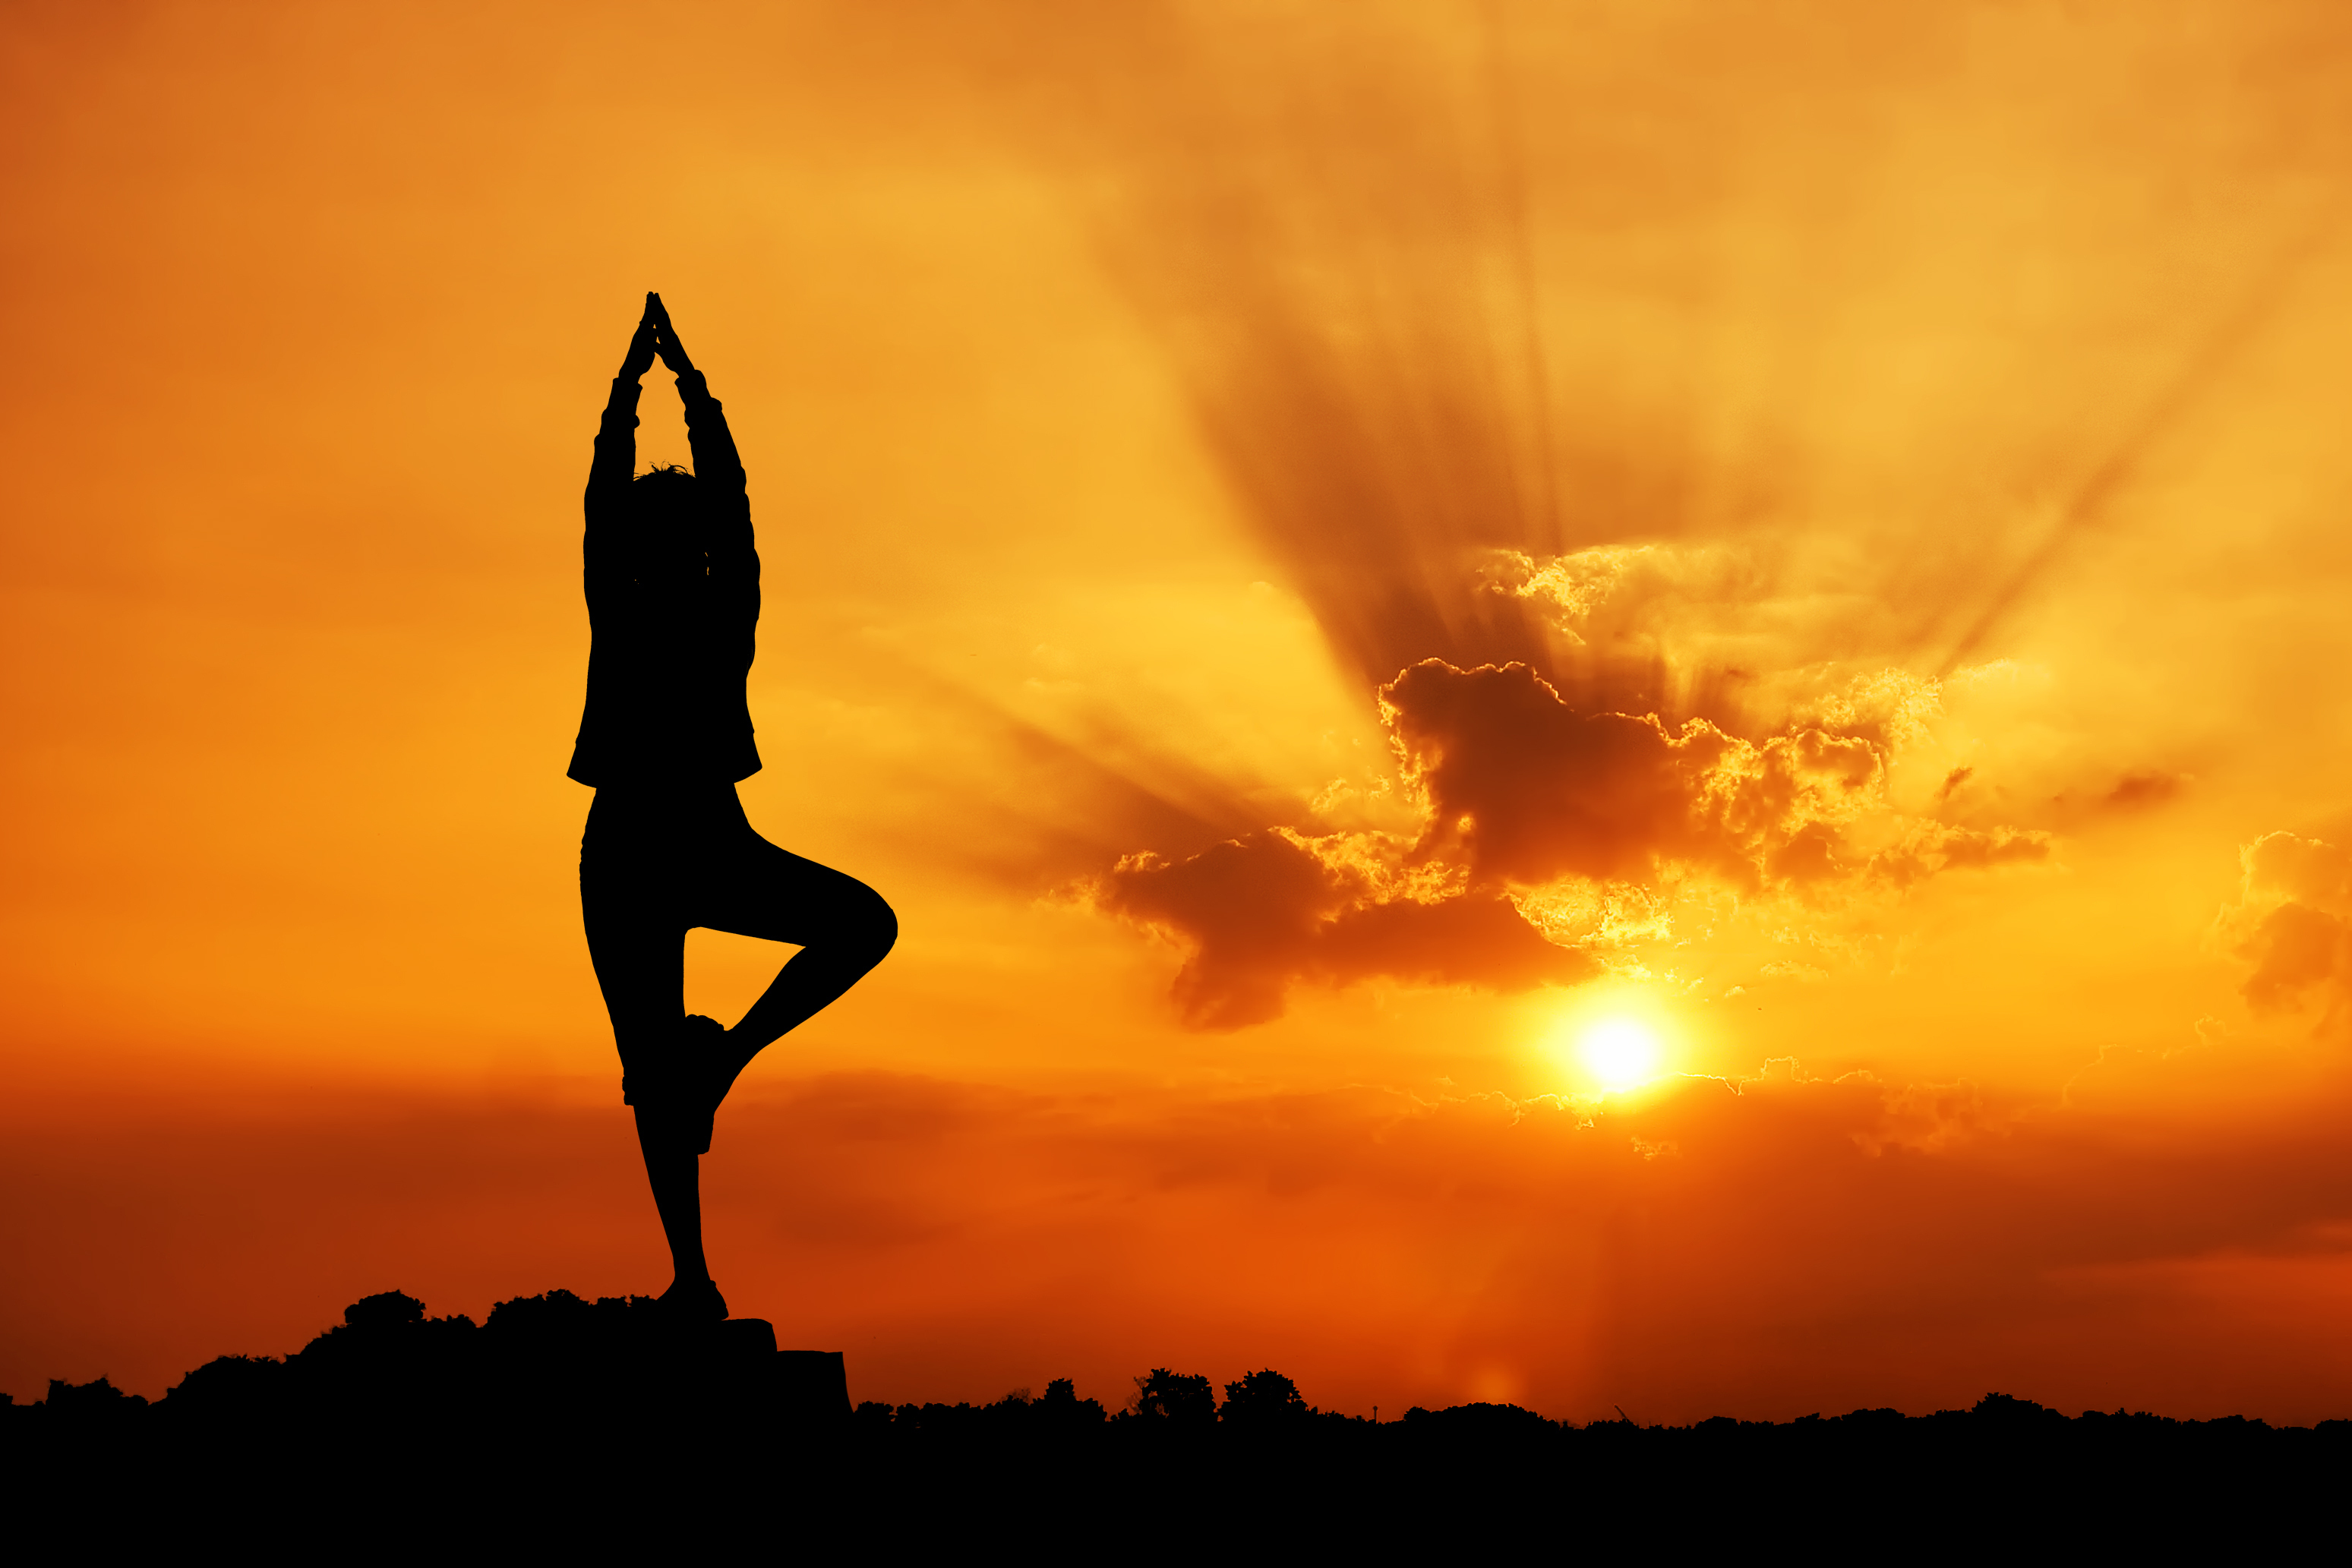 Yoga in the sunset wallpapers and images - wallpapers, pictures ...